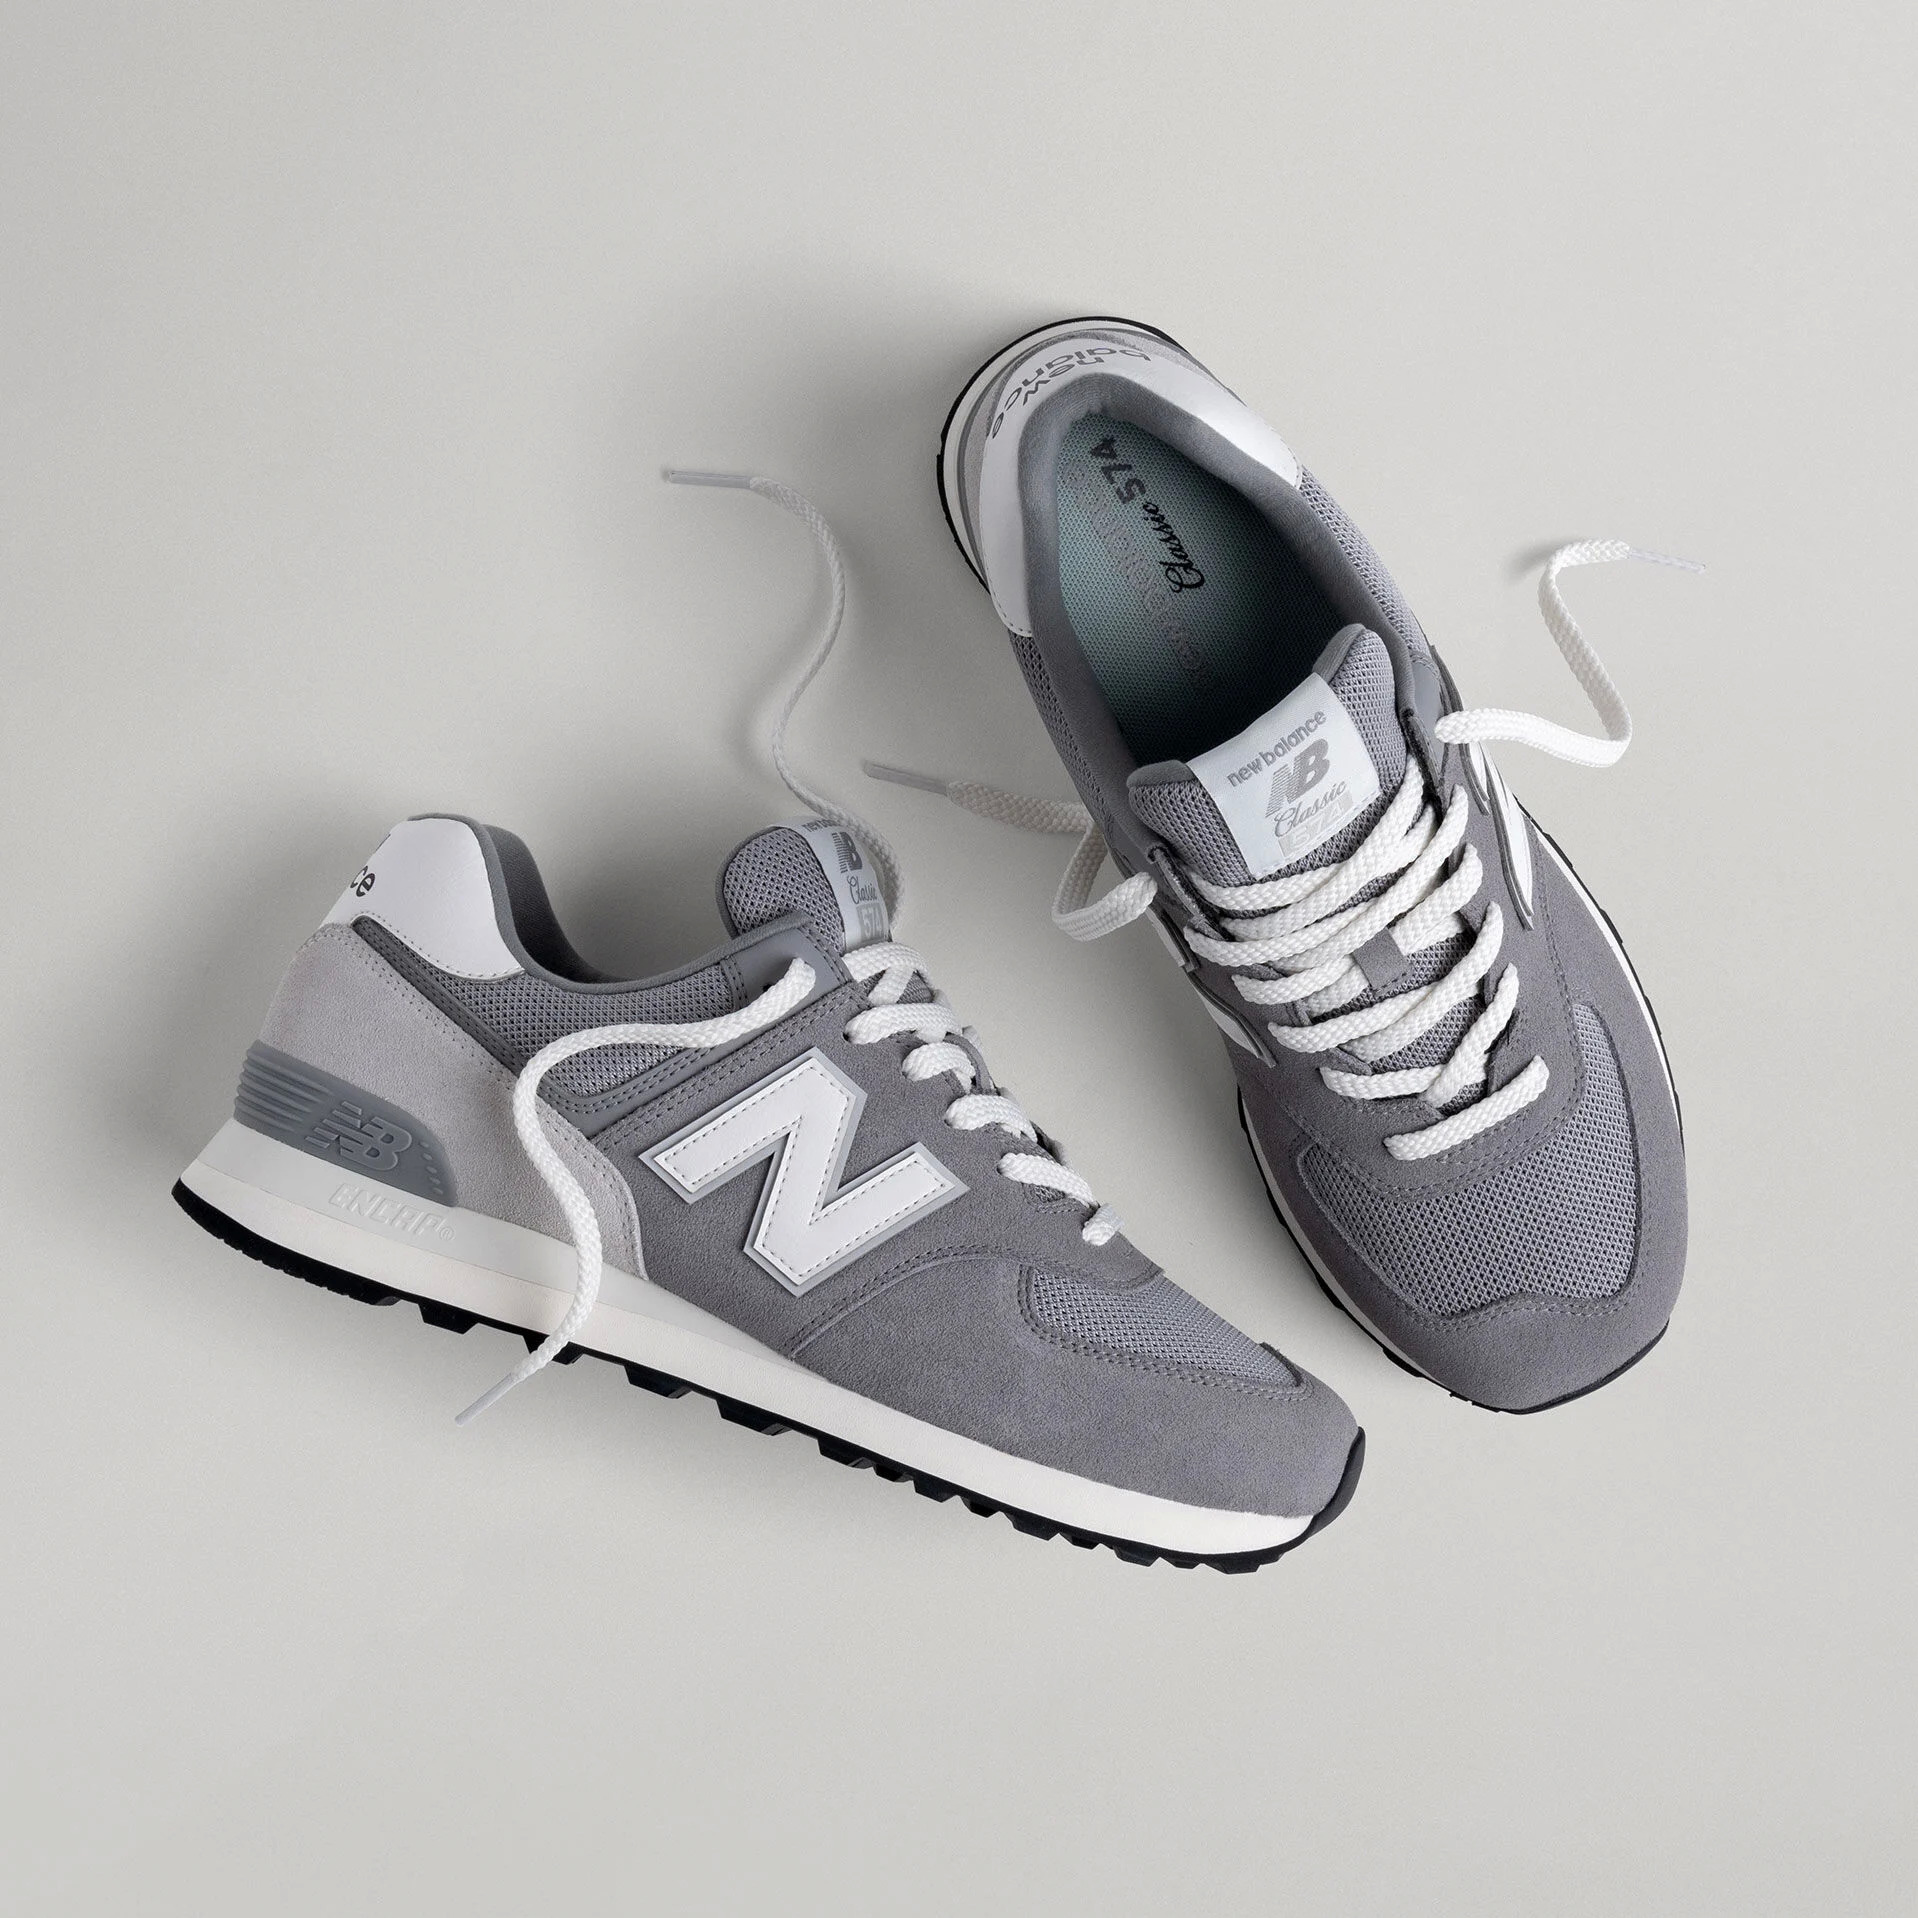 Joe’s New Balance Flash Sale up to 50% off and extra 25% off select styles